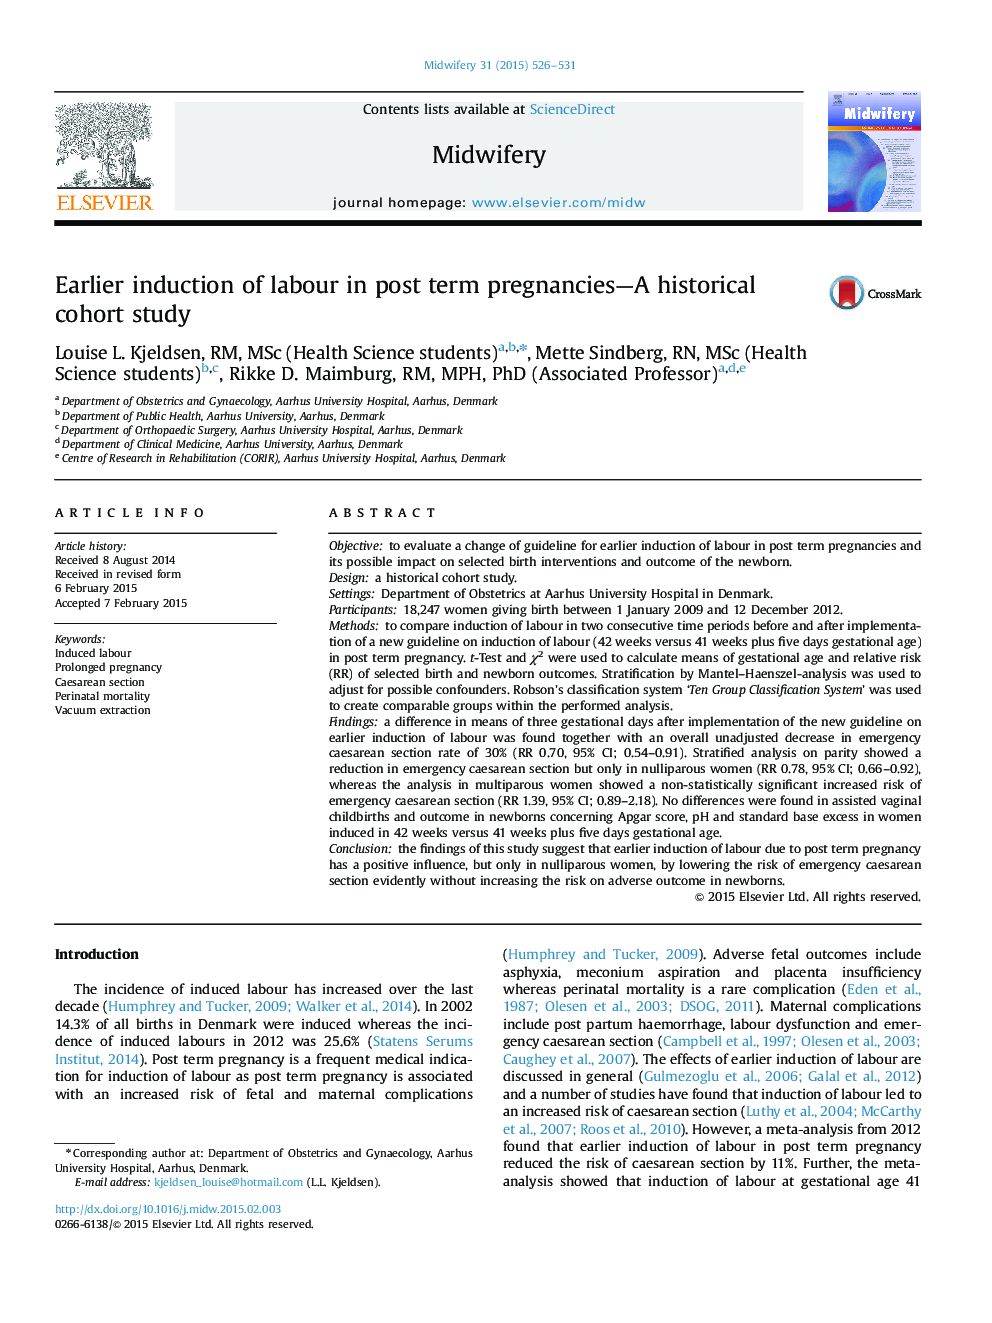 Earlier induction of labour in post term pregnancies—A historical cohort study